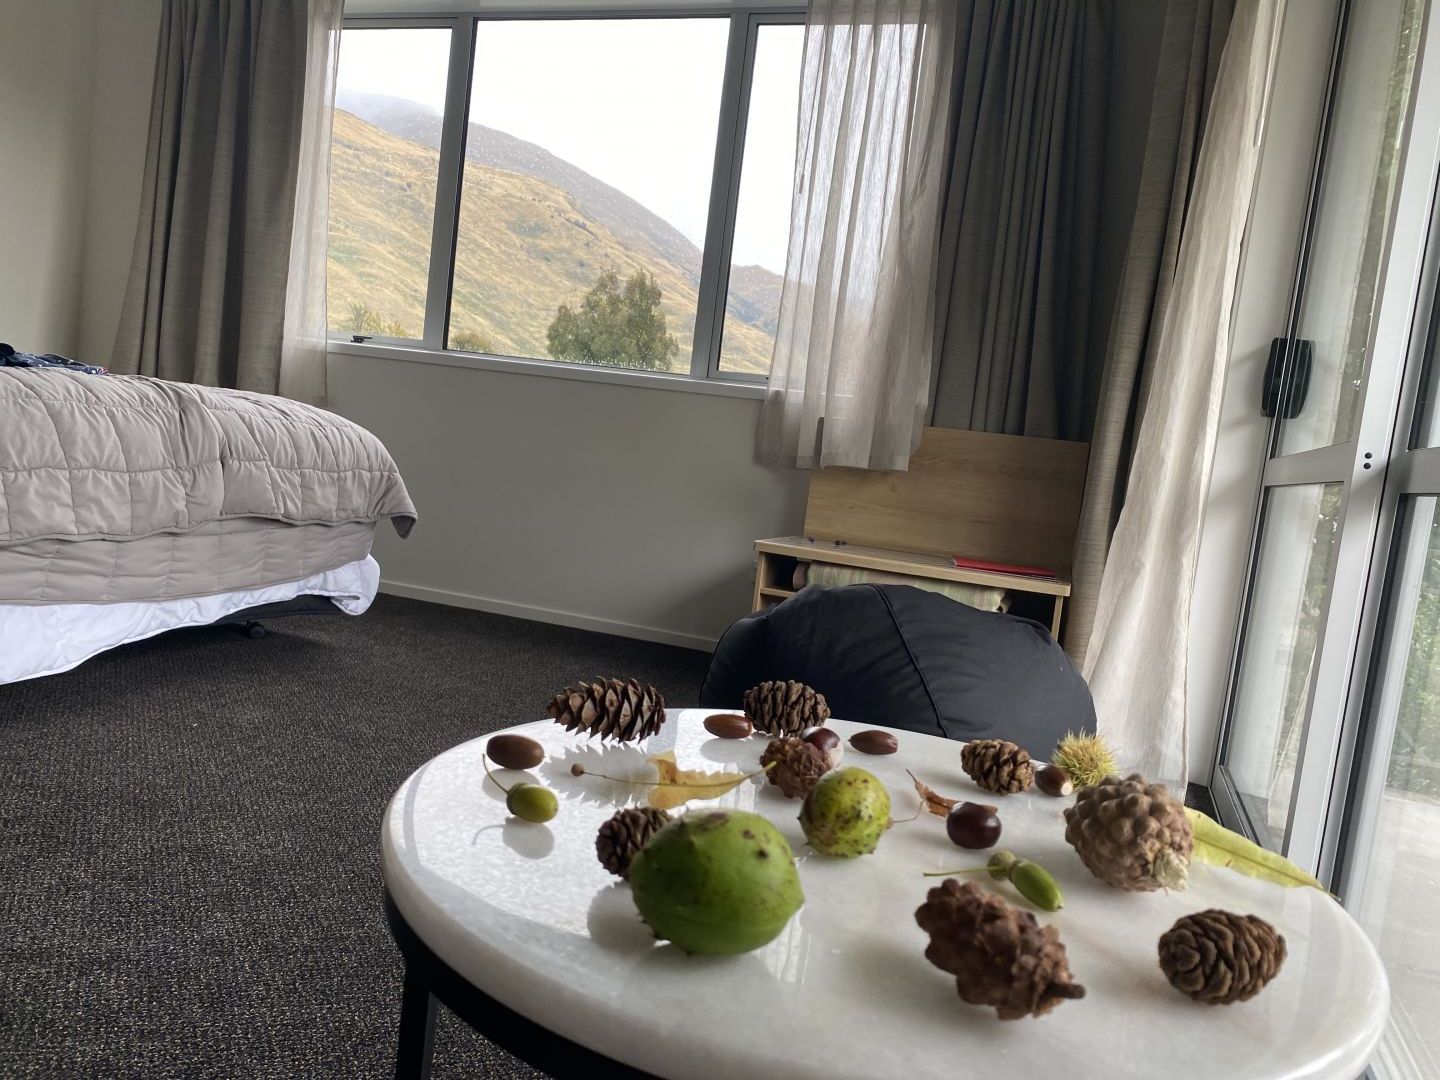 Interior of room at Wanaka Top 10 Holiday Park displaying pinecones and acorns on table collected by kids..